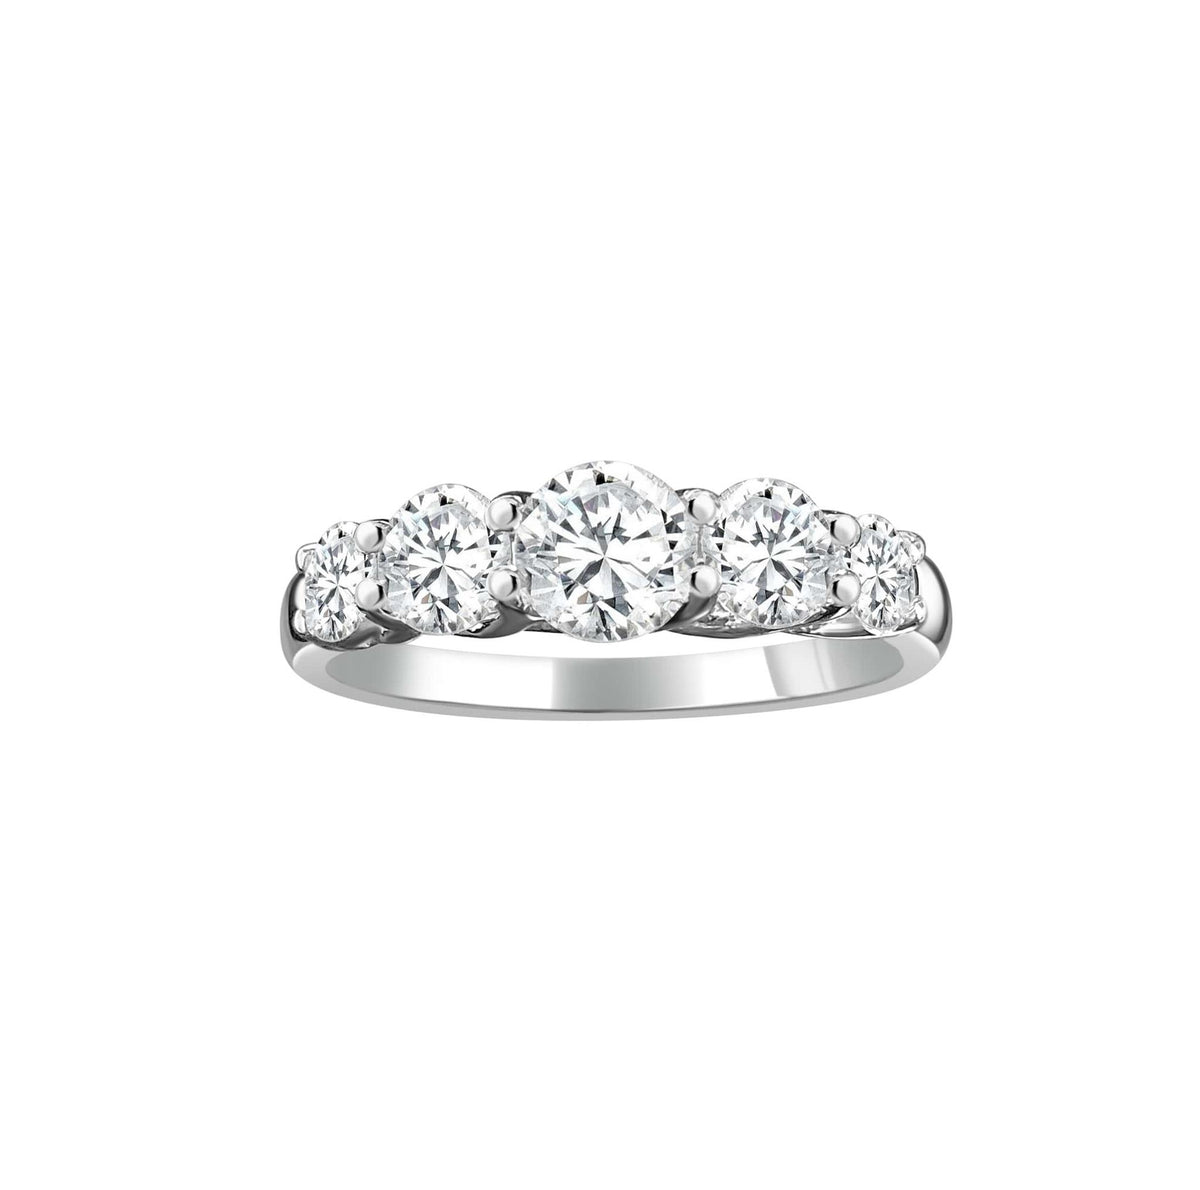 14Kt White Gold Prong Set Graduated Ring With 1.00cttw Natural Diamonds